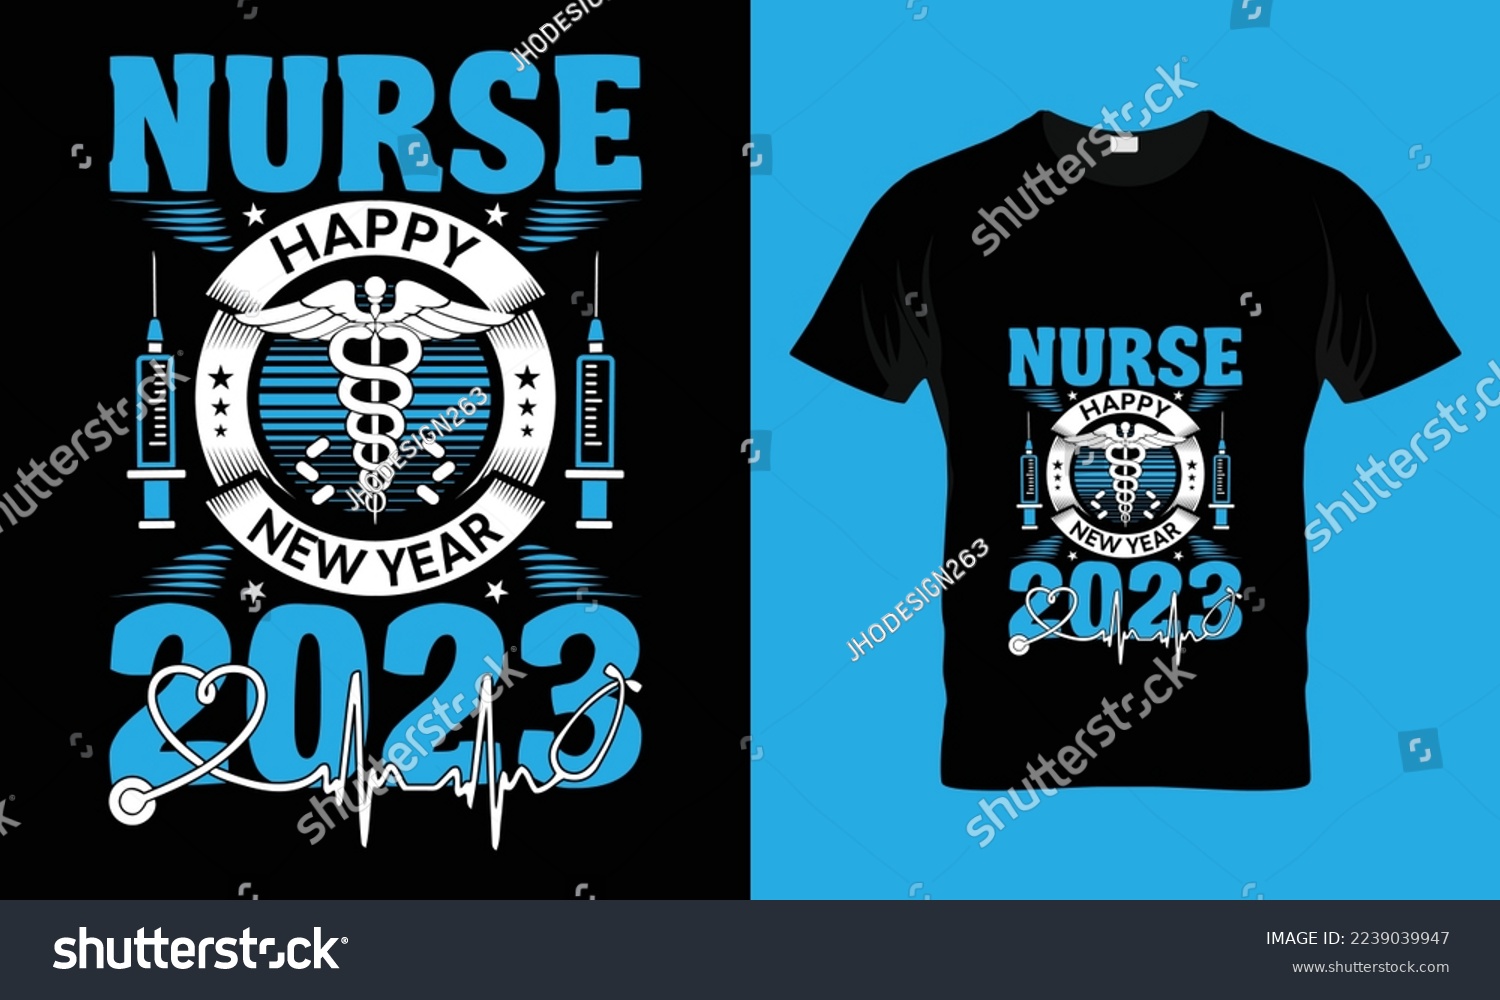 SVG of Nurse Happy new year 2023 design template vector and typography.
Ready for t-shirt, mug,gift and other printing,2023 svg design,New Year Stickers quotes t shirt designs
Happy new year svg.
 svg